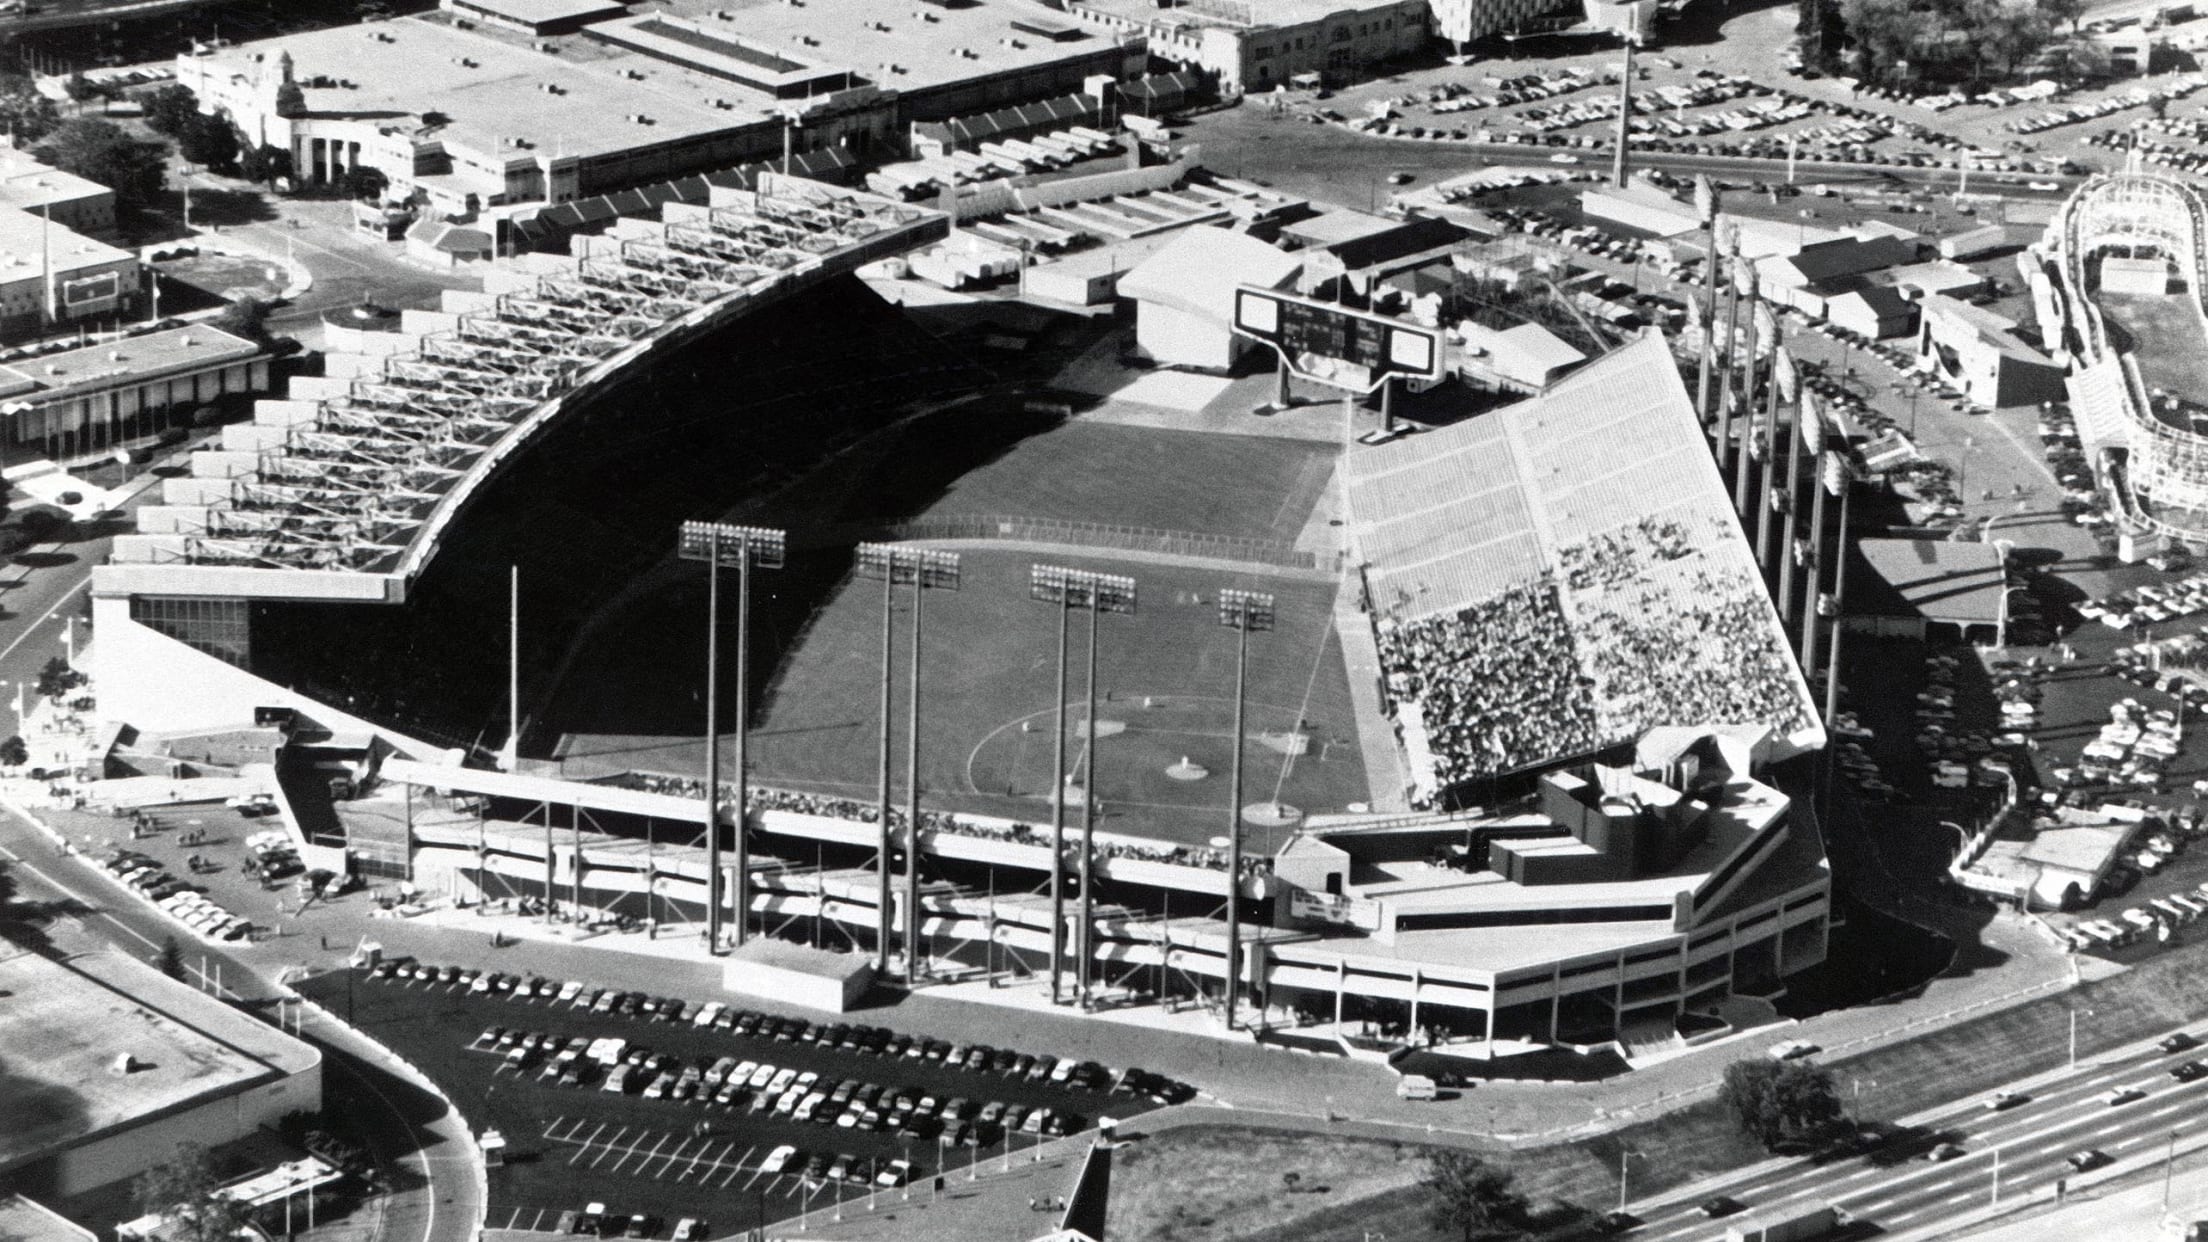 Exhibition Stadium - history, photos and more of the Toronto Blue Jays  former ballpark